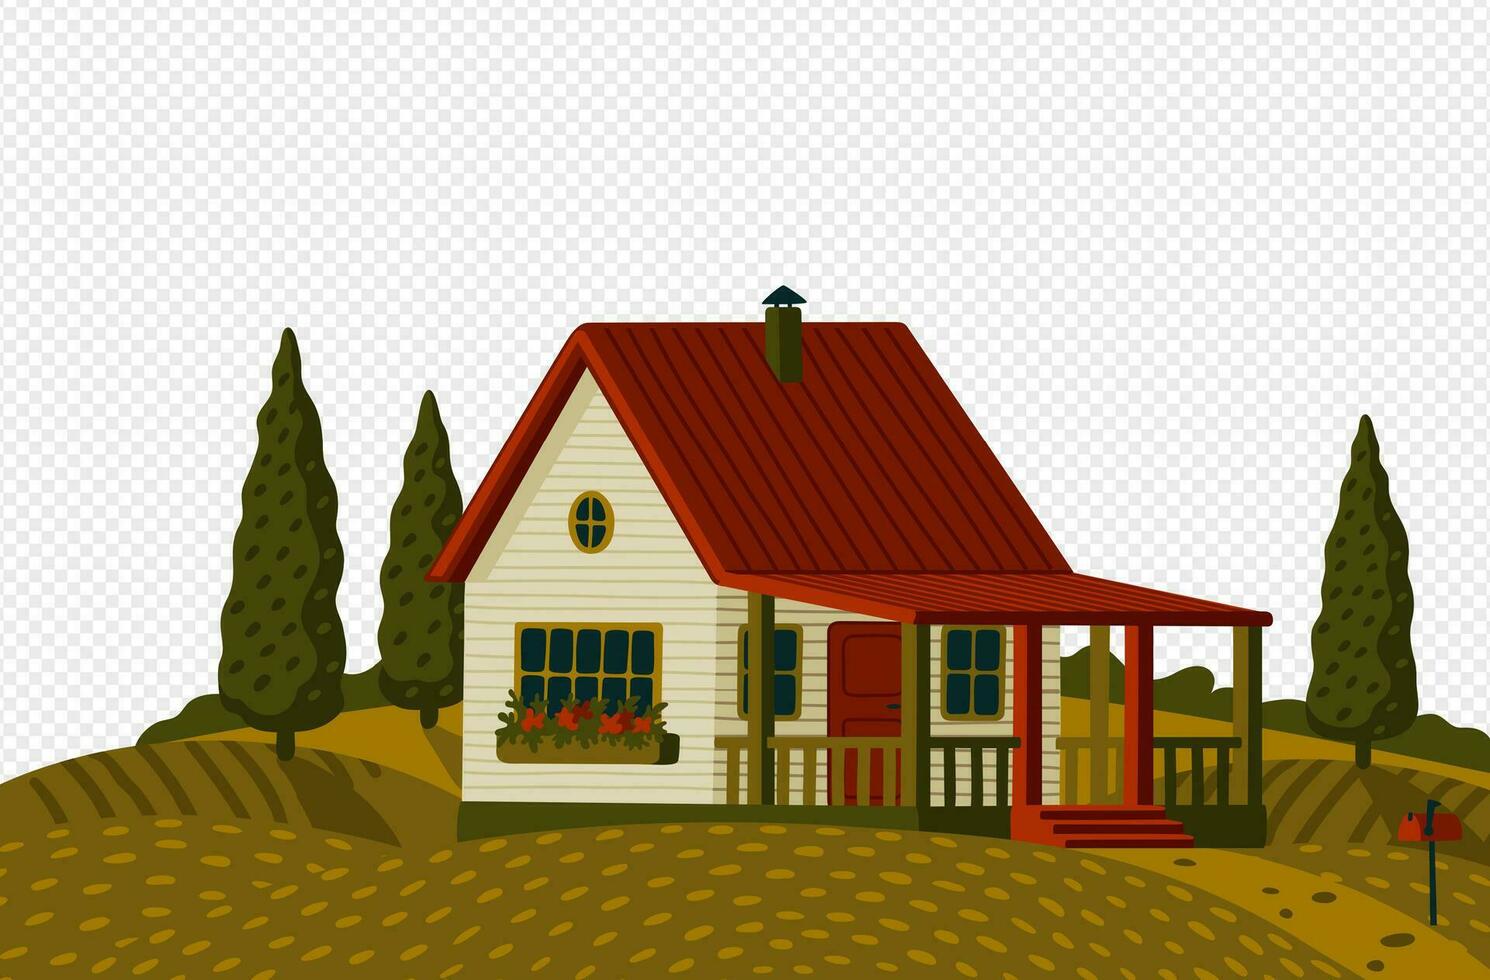 Countryside landscape. Rural landscape with white suburb house in rustic style on green field with cypresses vector